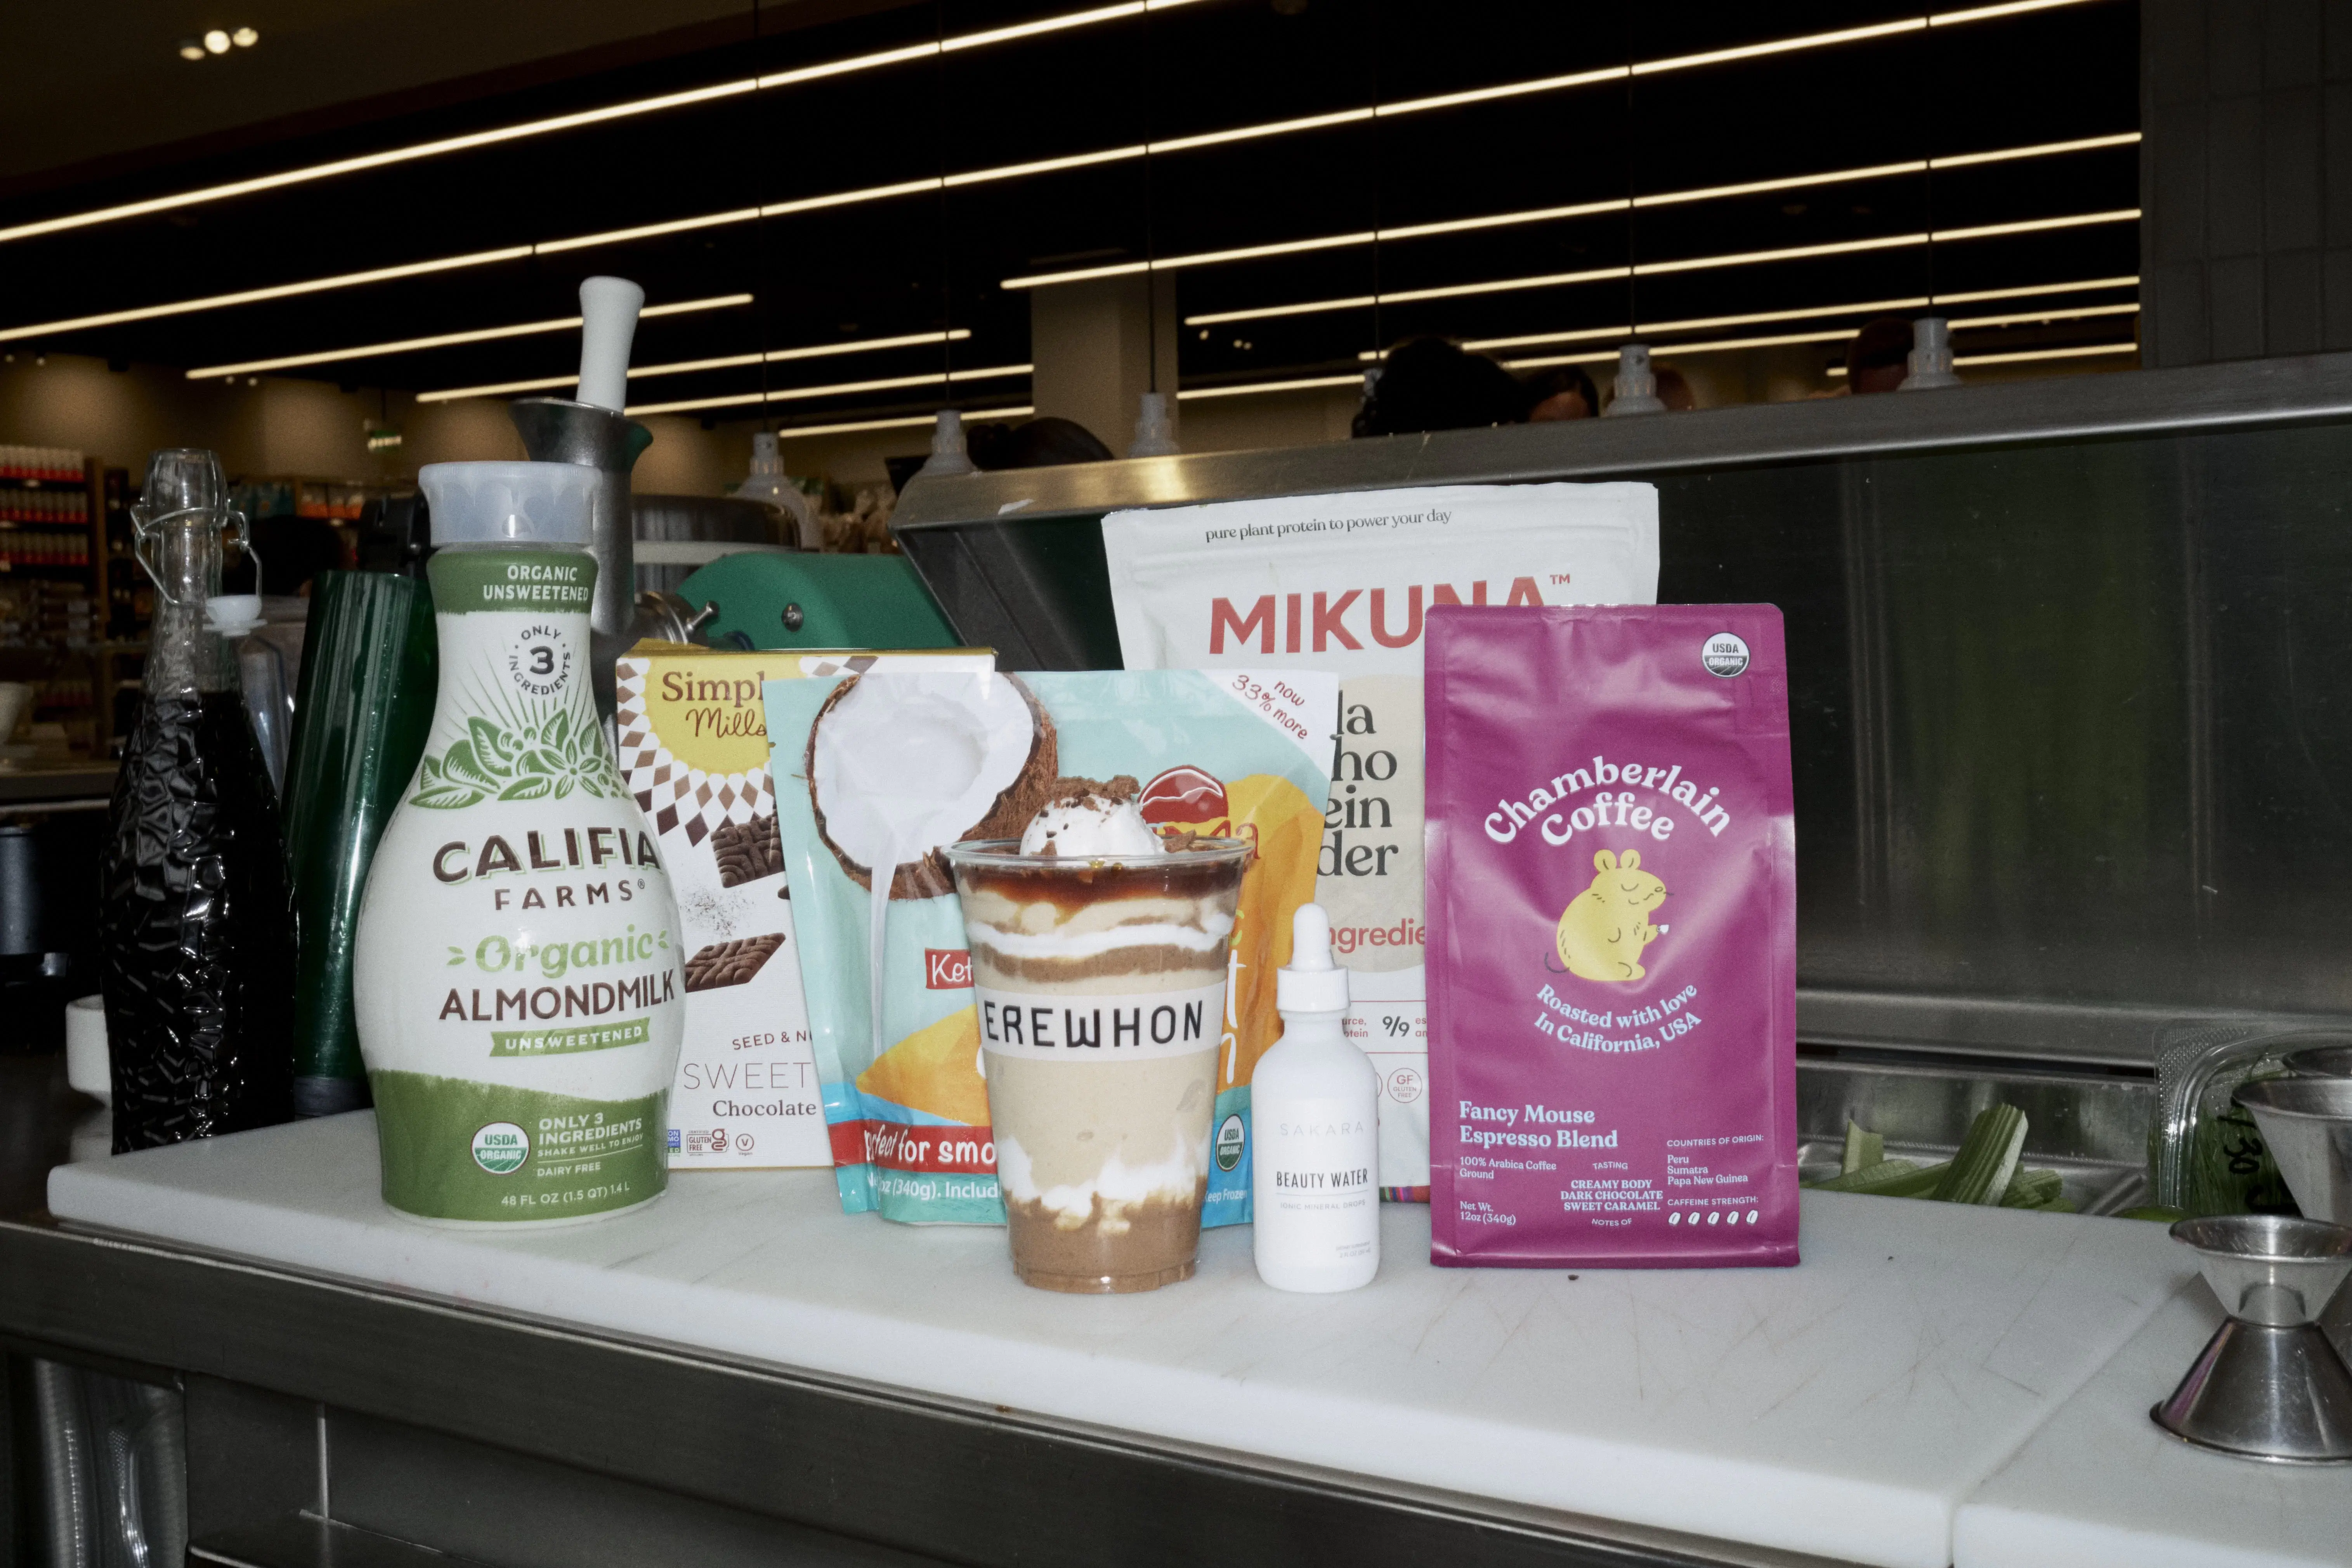 Erewhon partners with Chamberlain Coffee for Limited-Edition Smoothie